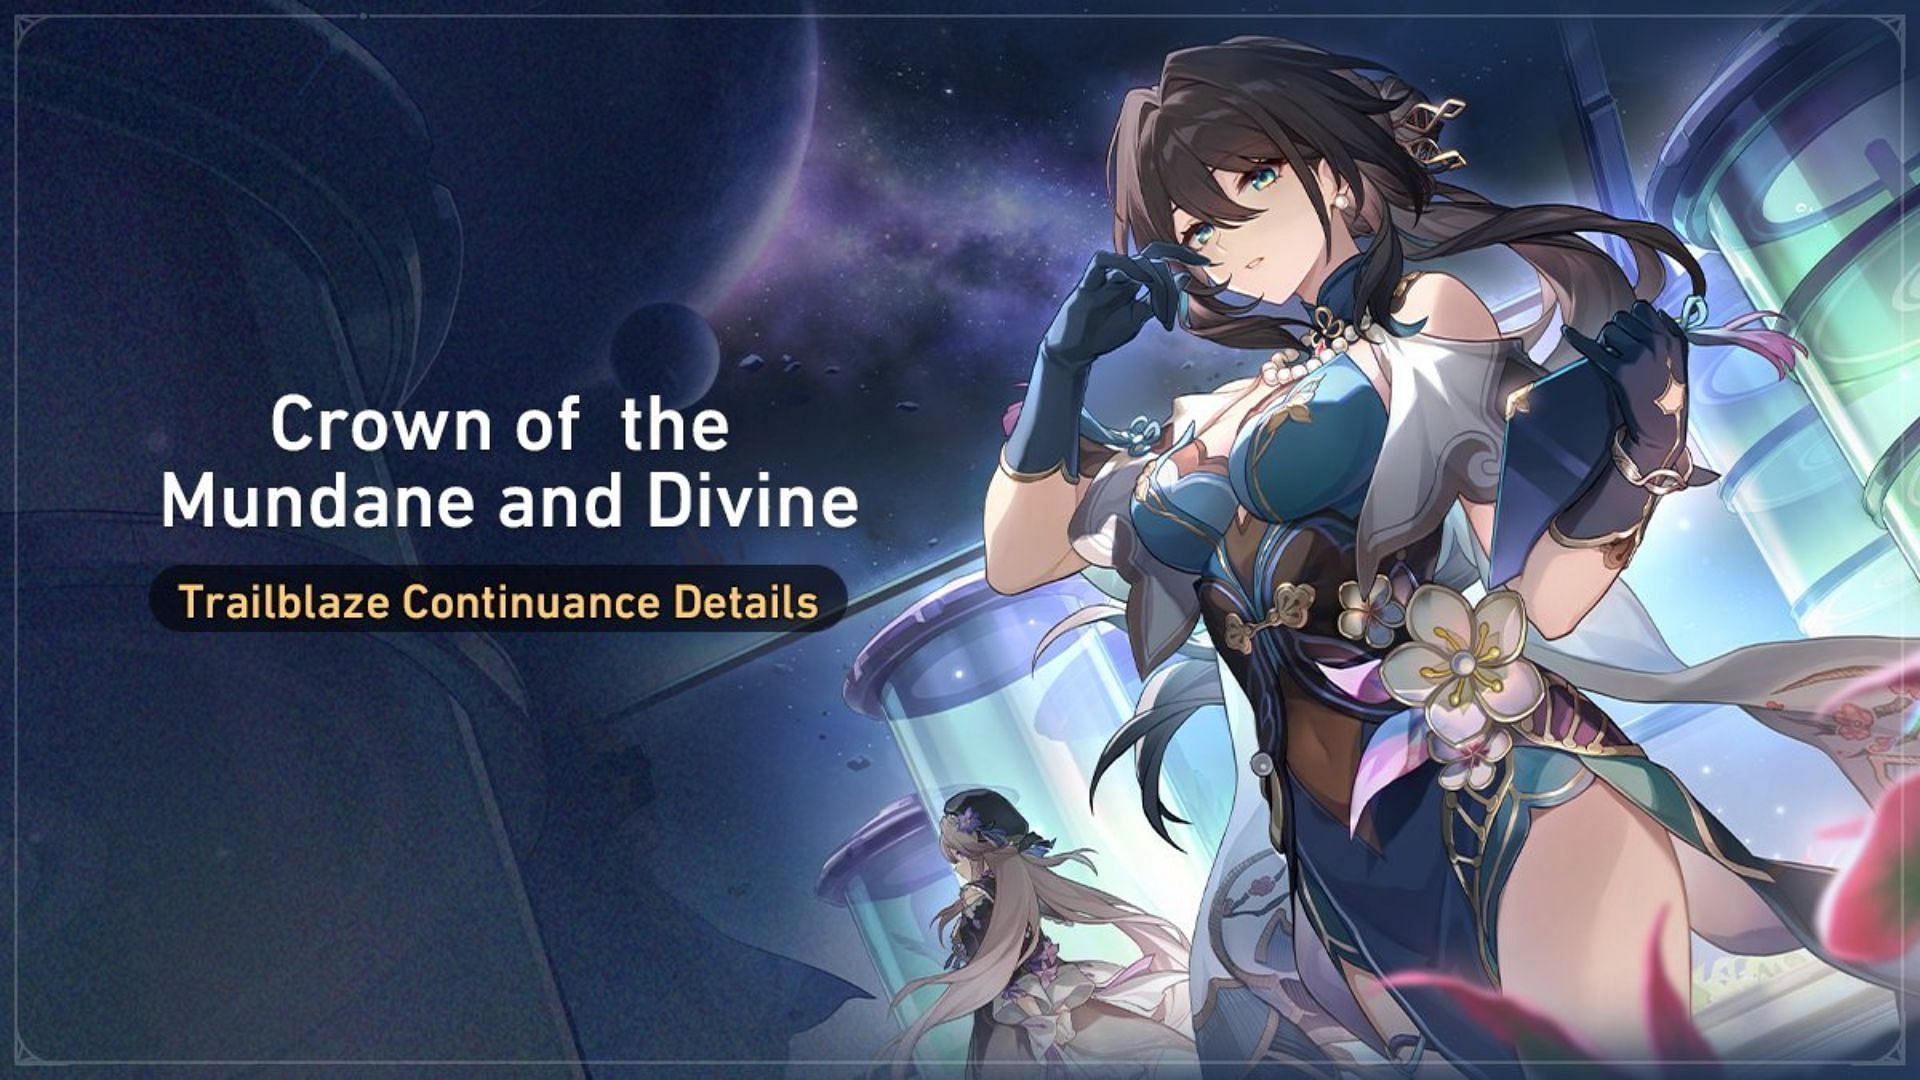 Image showing the cover art for Crown of the Mundane and Divine